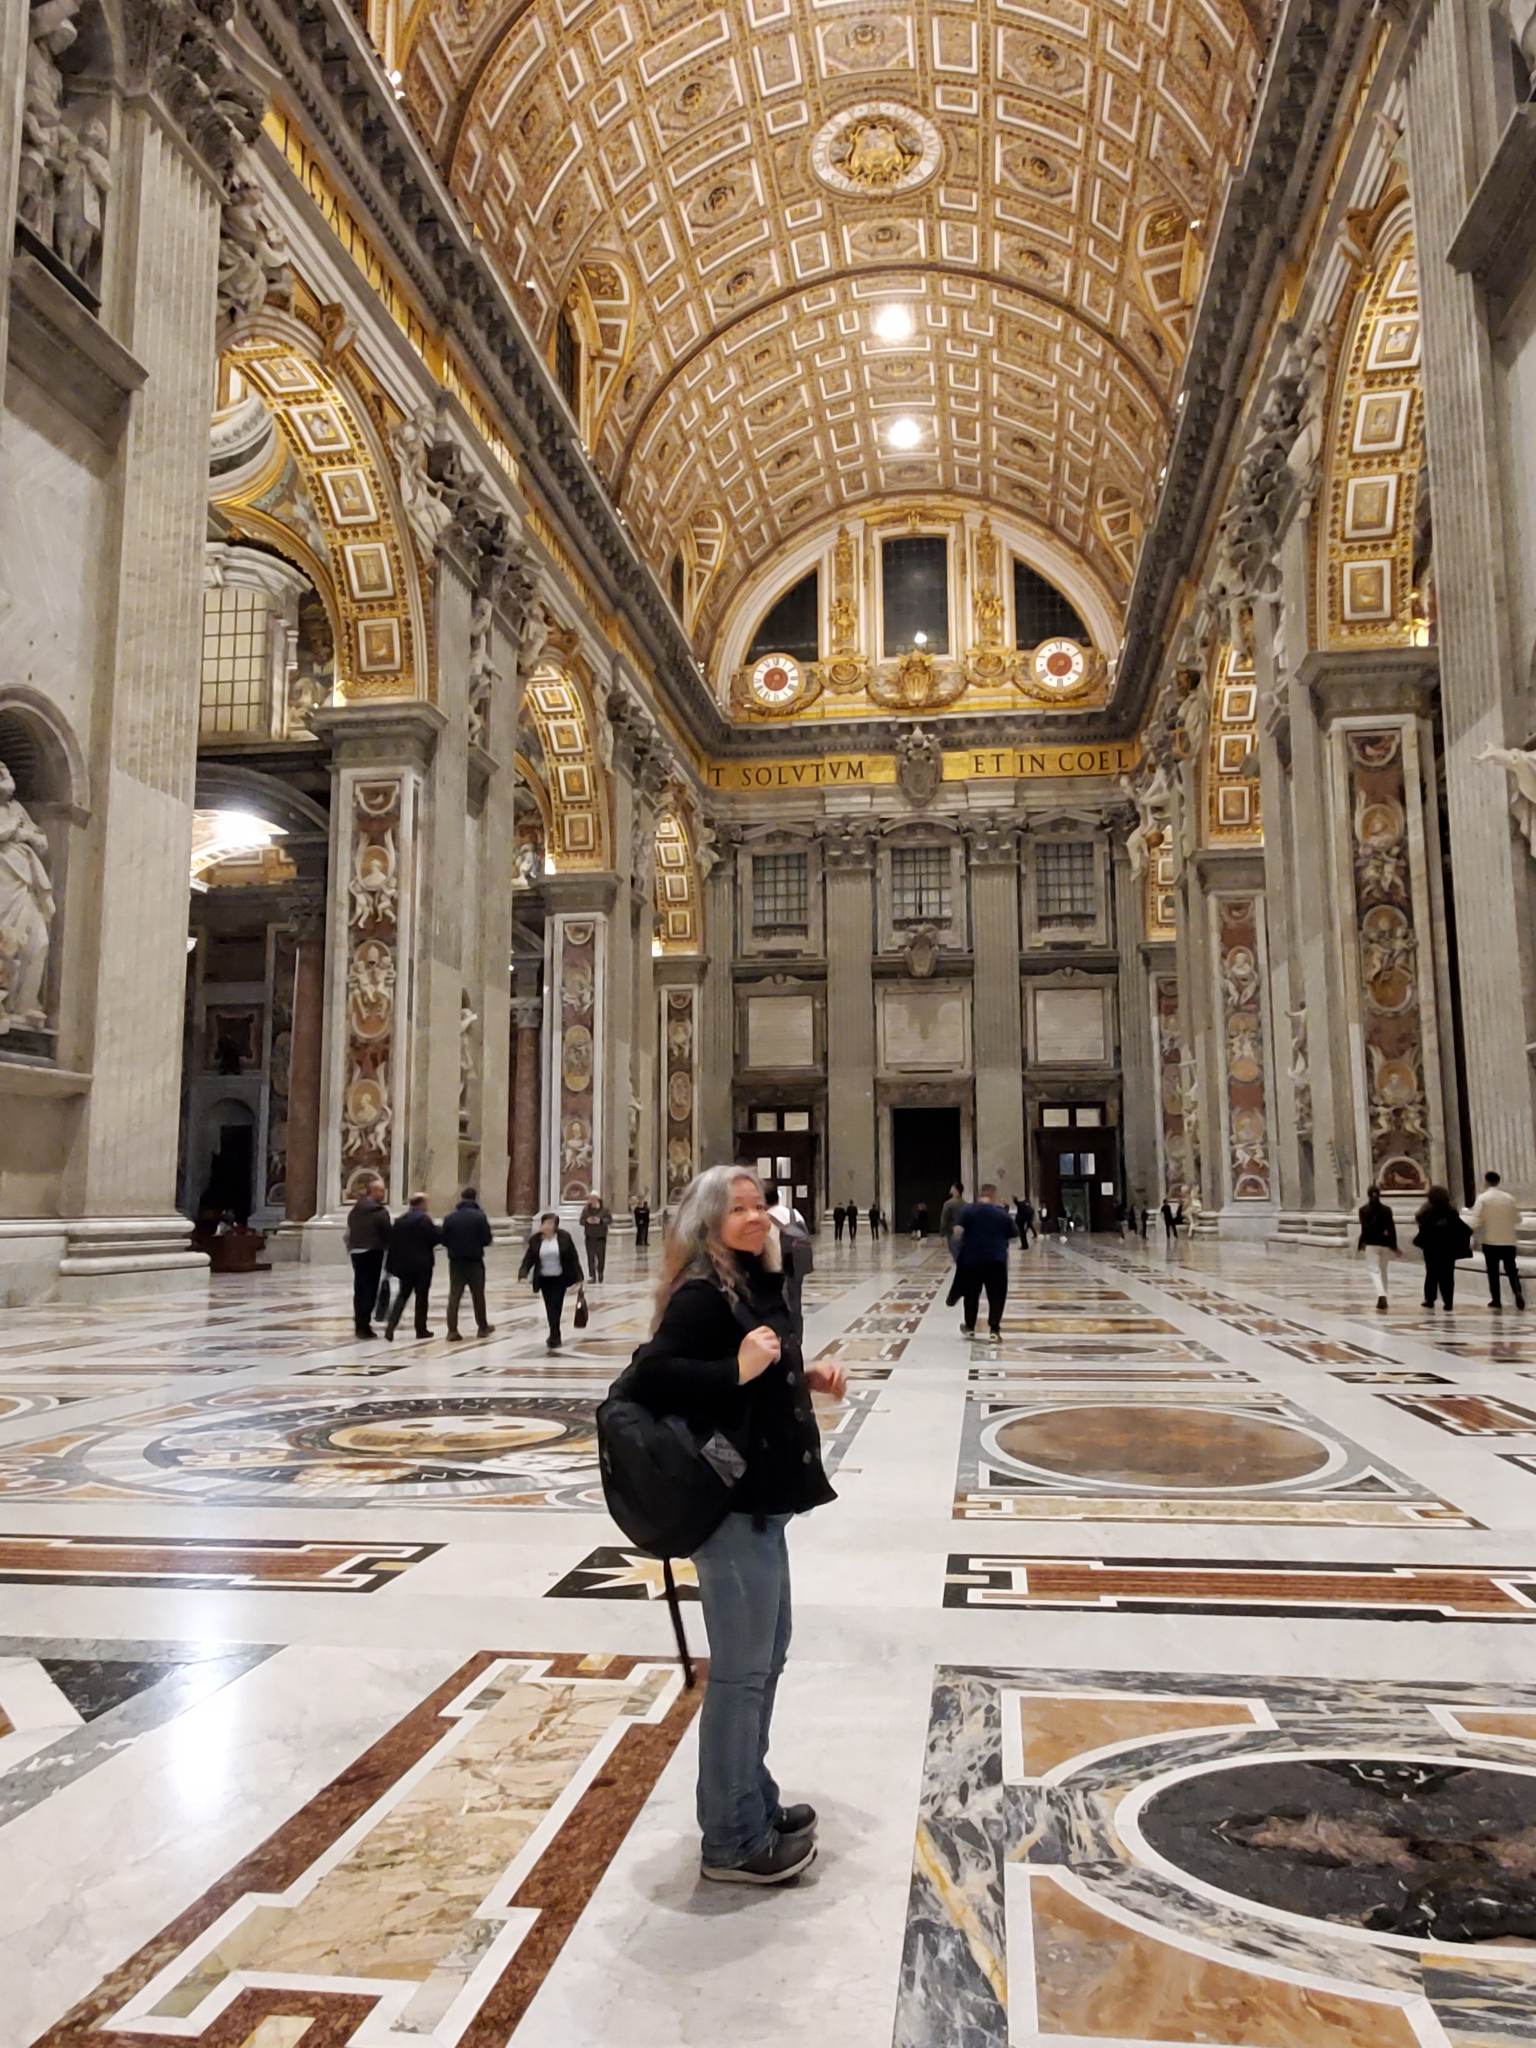 Exploring St Peter's Basilica In Rome, Italy